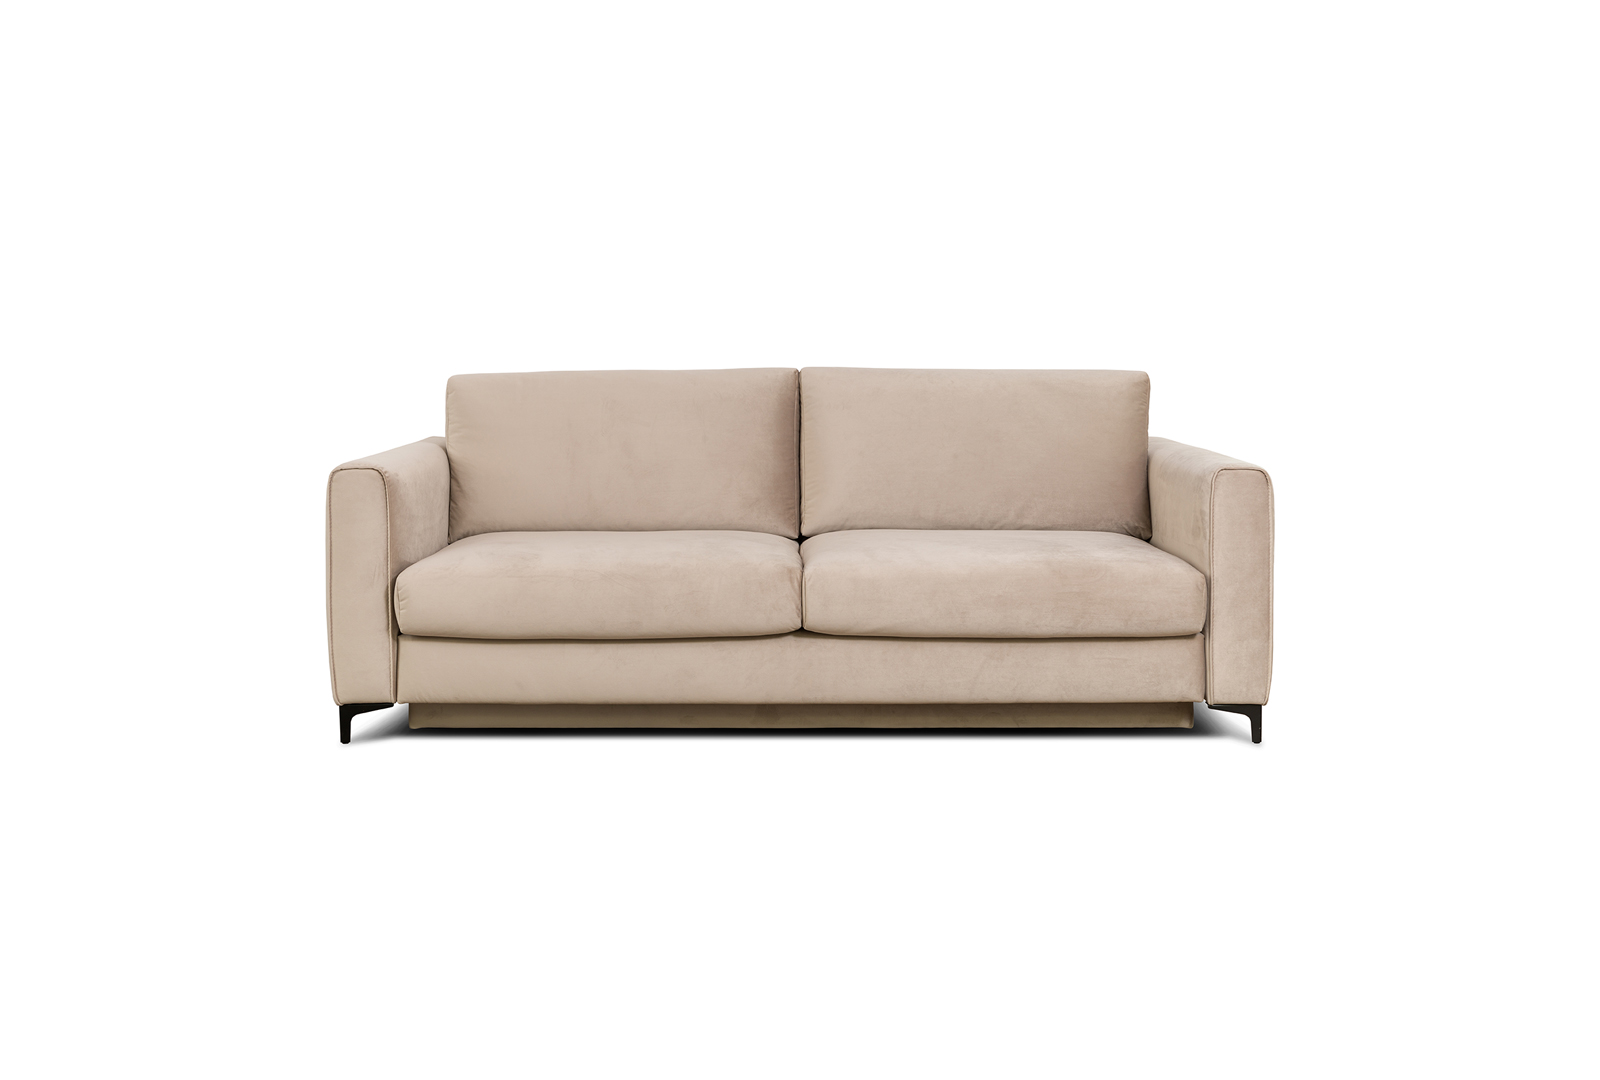 MOON 3 seater sofa Sides